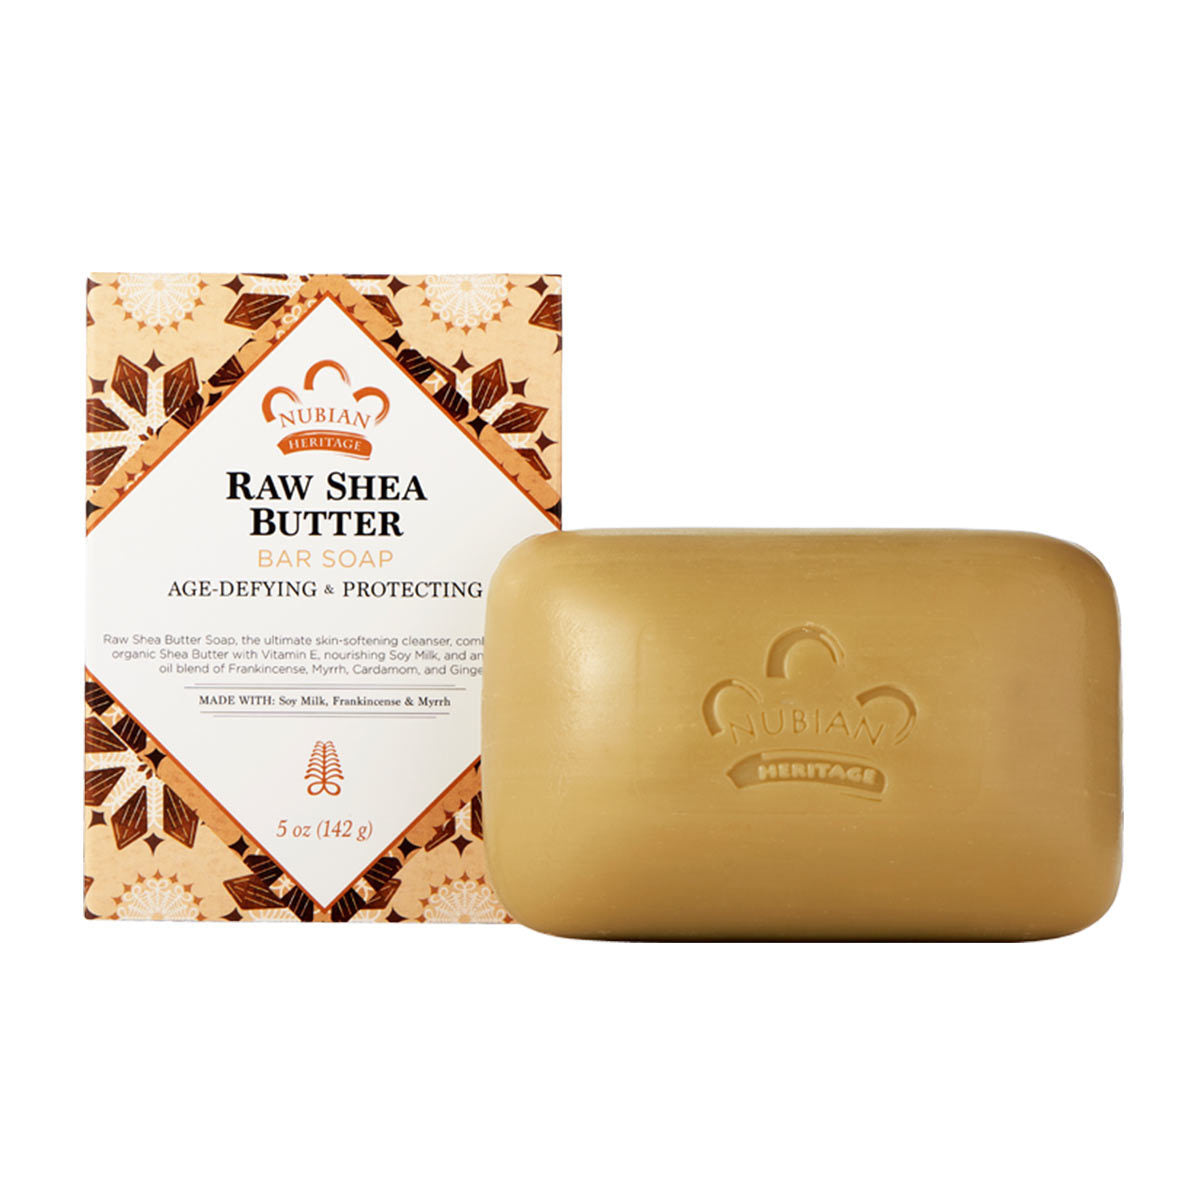 Primary image of Raw Shea Butter Bar Soap